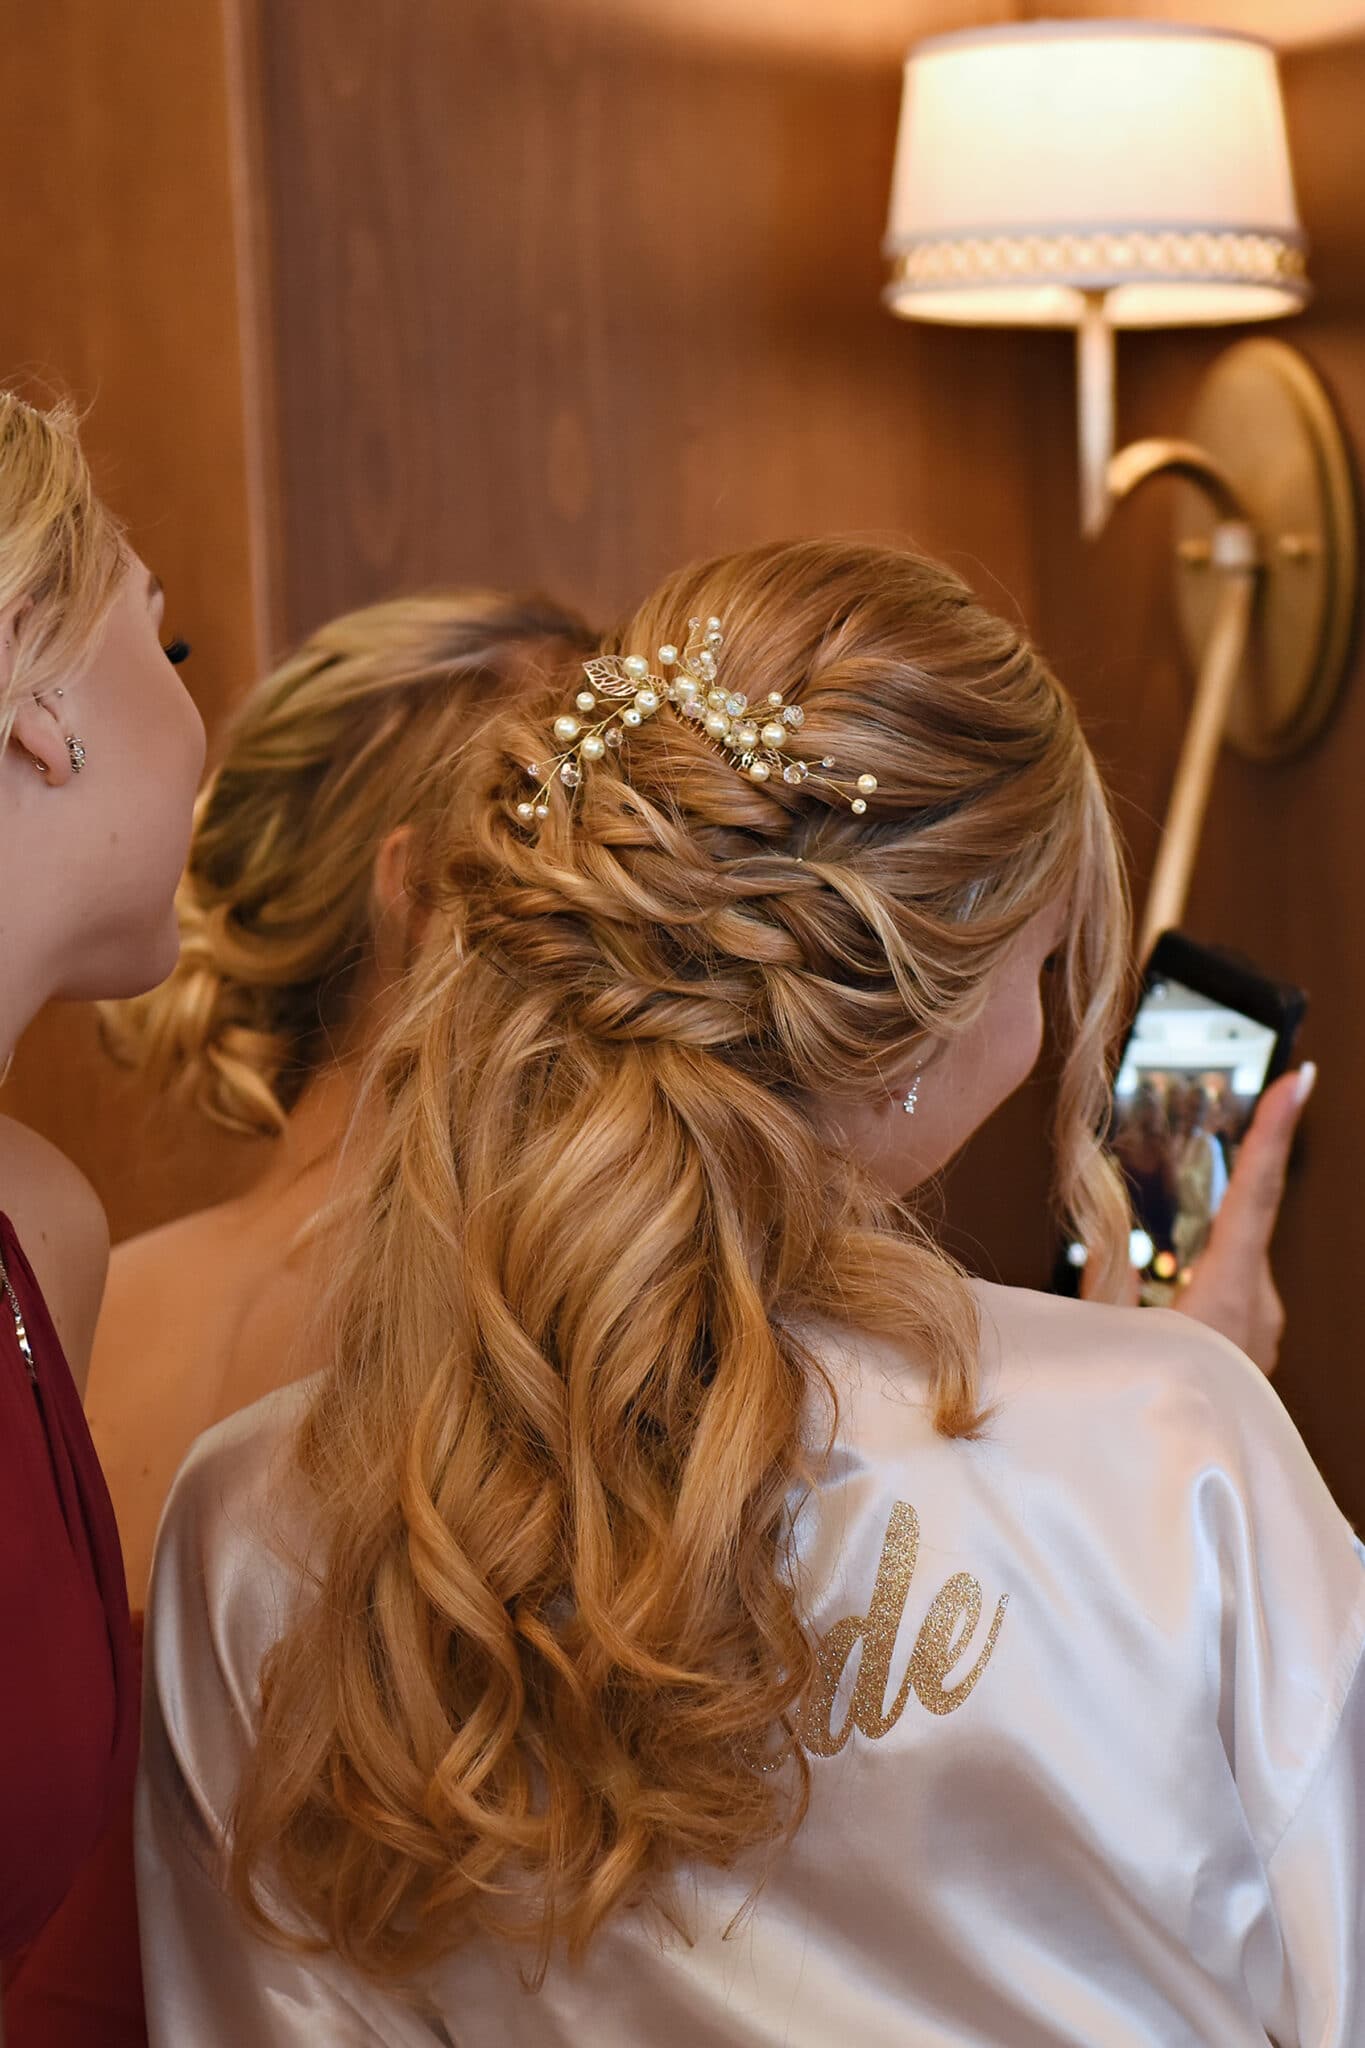 Rear view of bride taking a selfie with bridesmaids